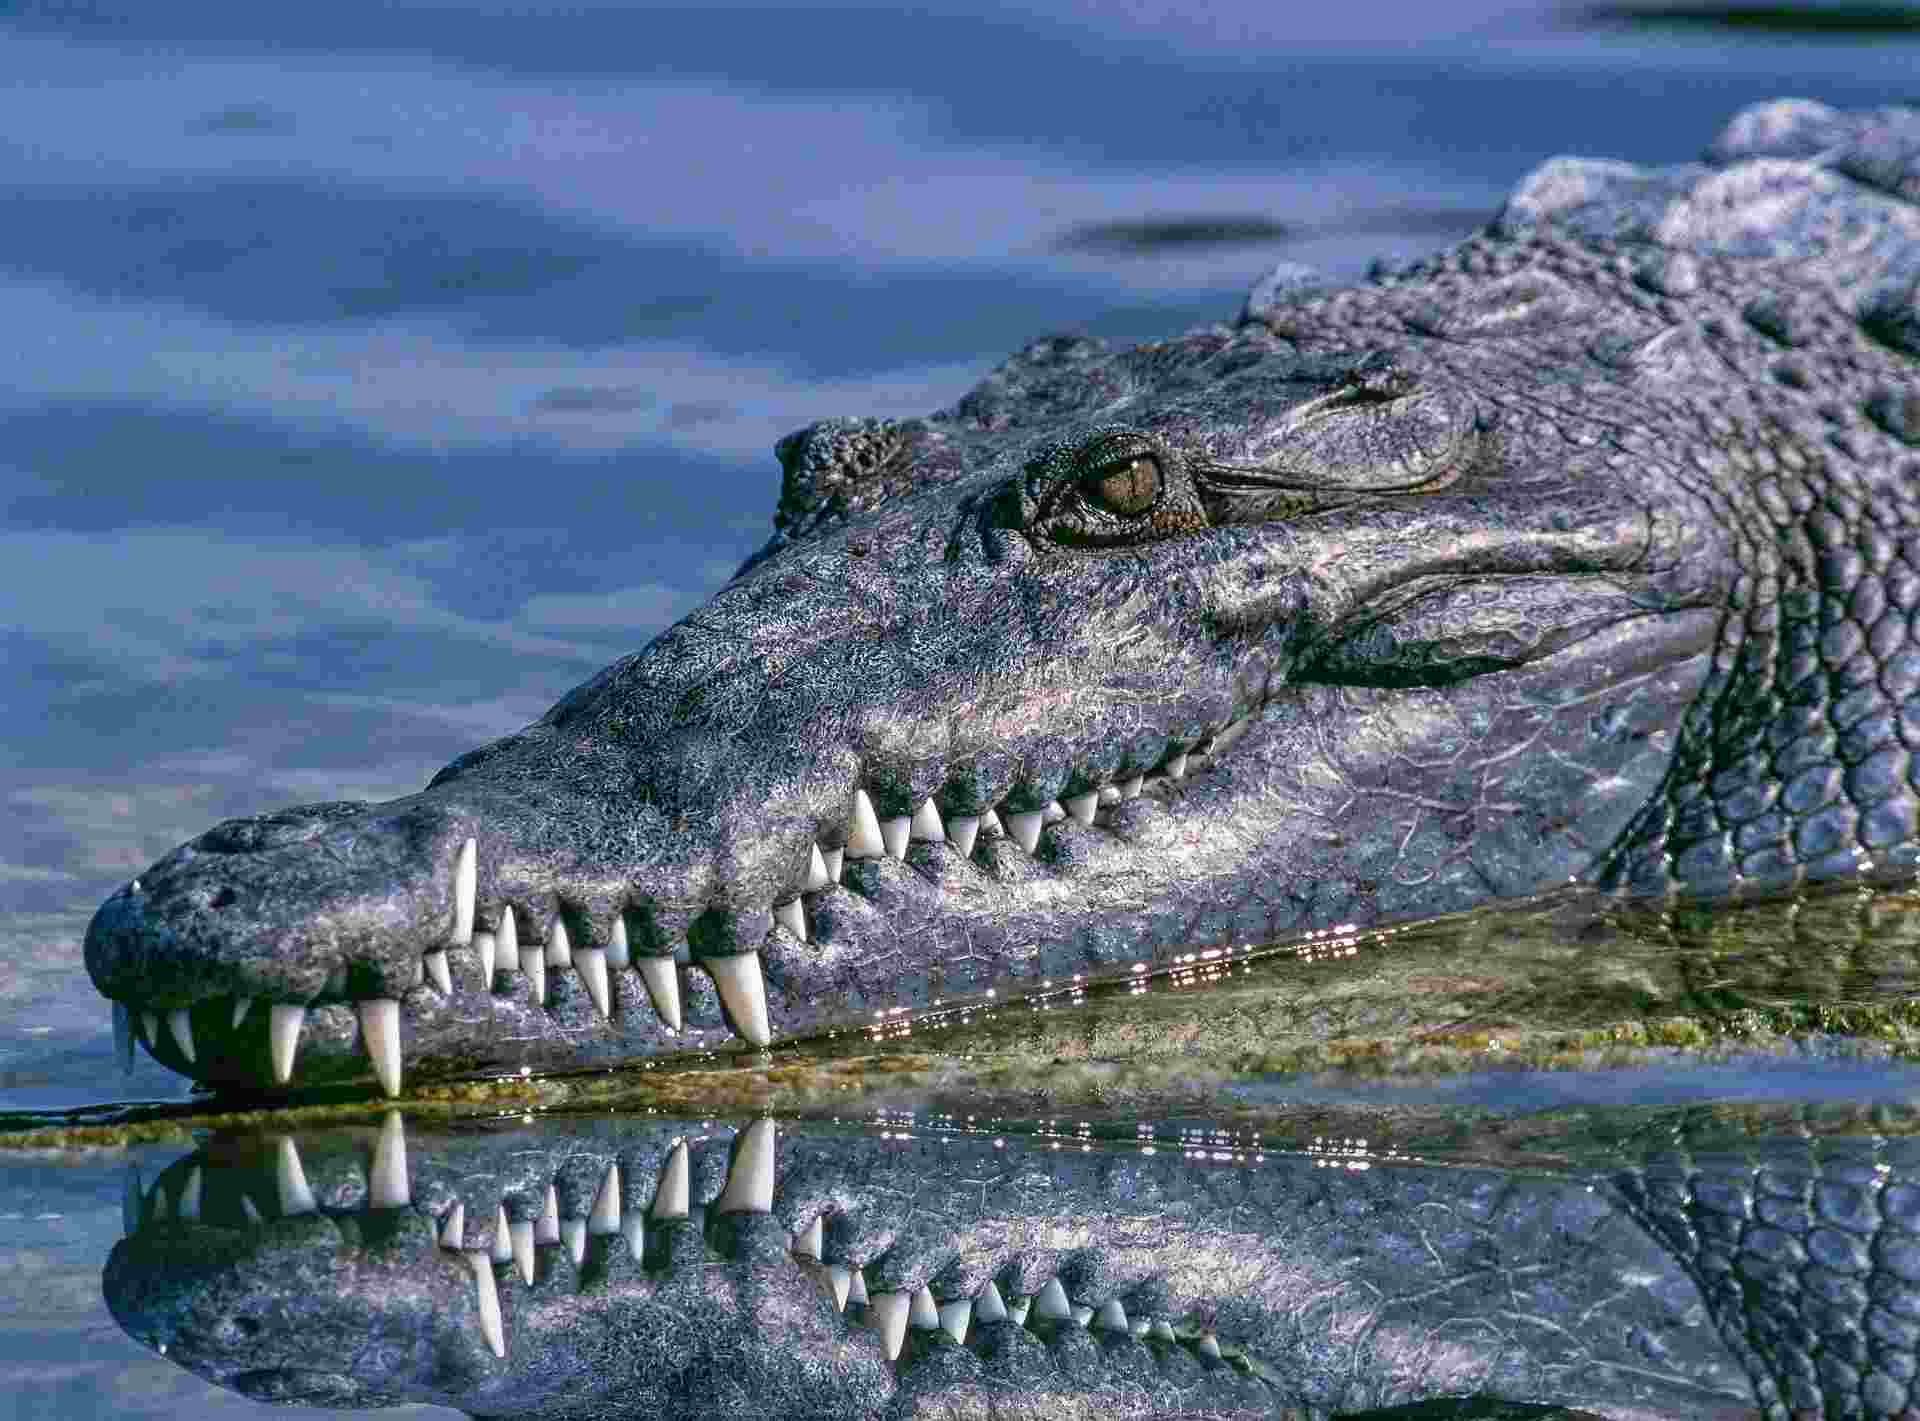 Discover the science behind crocodile running speeds